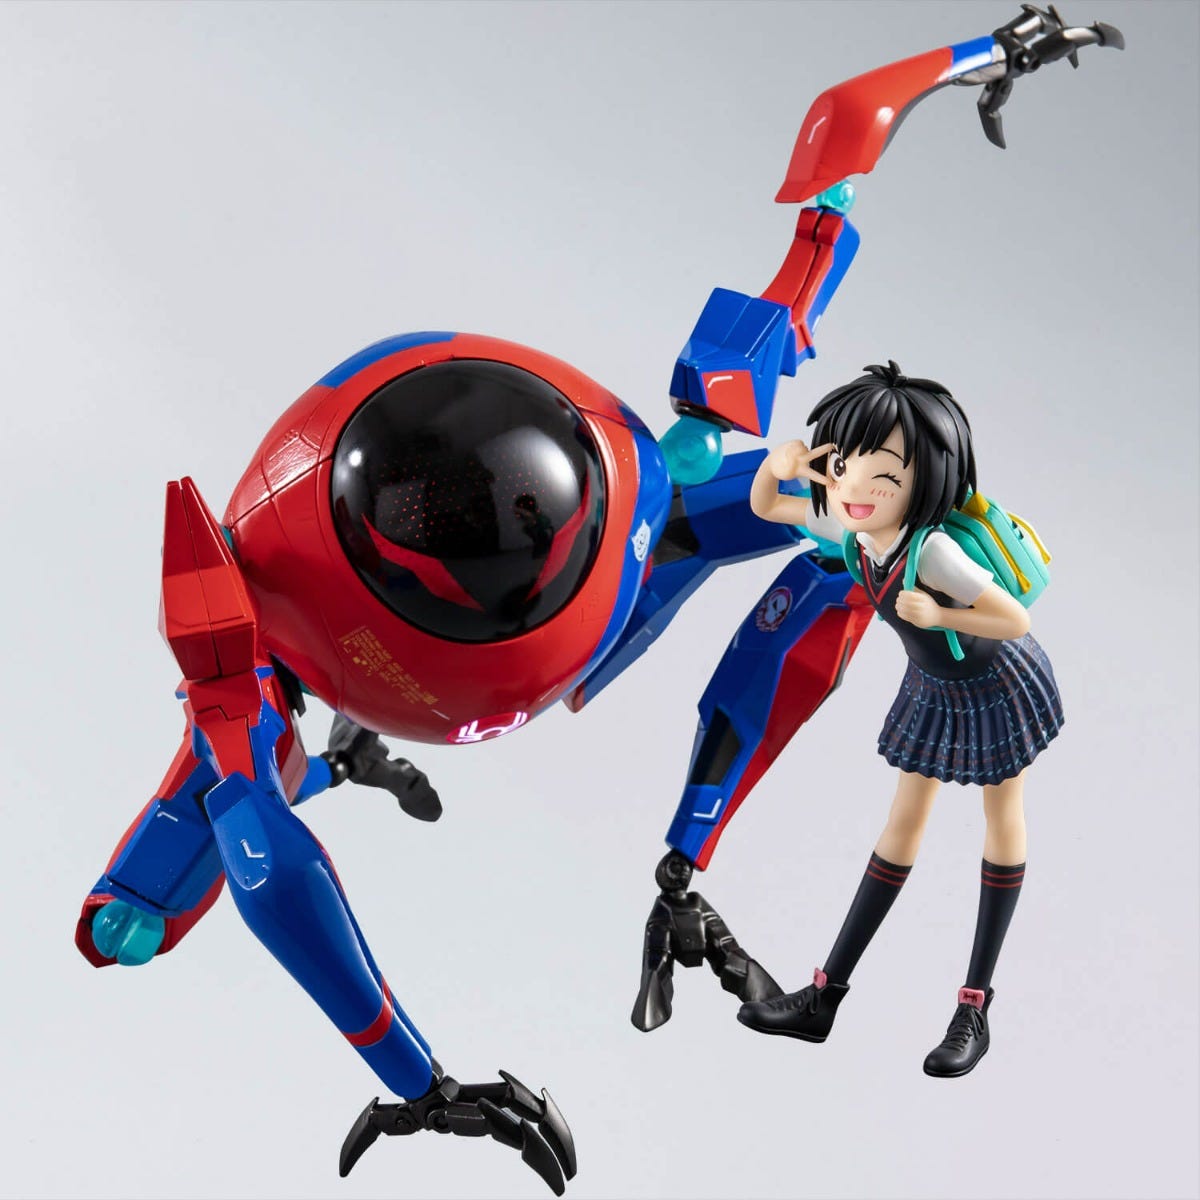 Sen - Ti - Nel SV - Action Peni Parker & SP//dr "Spiderman: Into the Spider - Verse" Collectible Figures